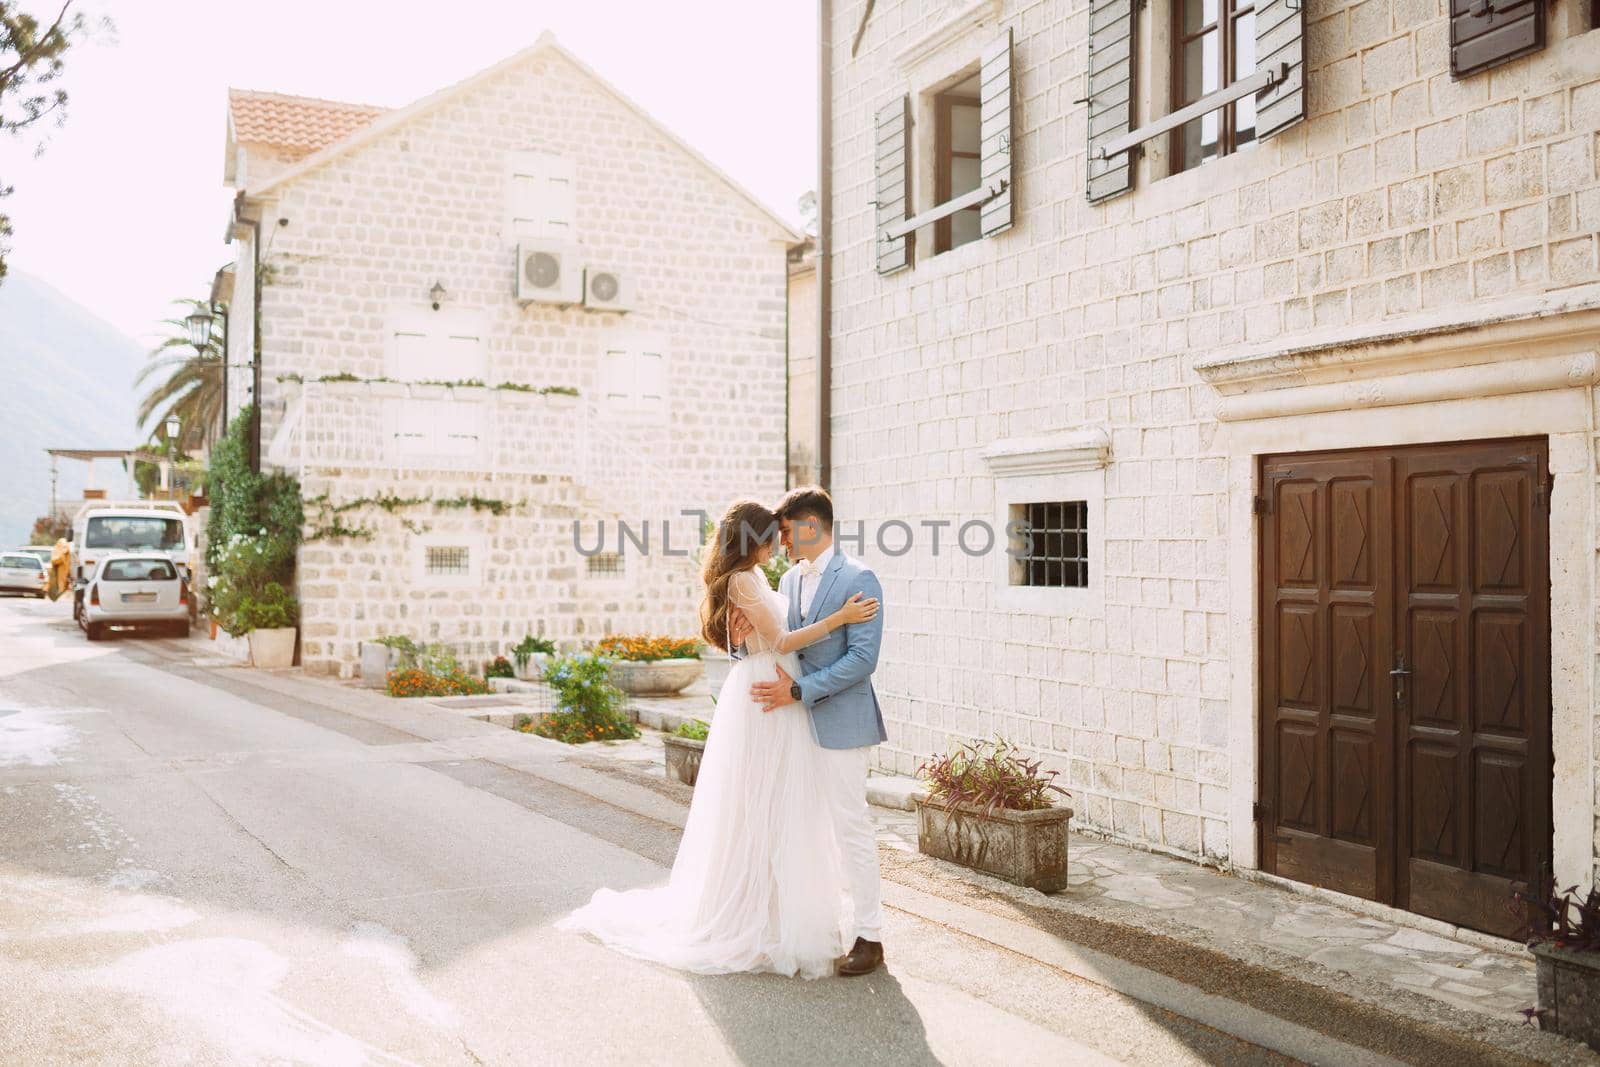 The bride and groom are embracing near the beautiful white houses in the old town of Perast . High quality photo